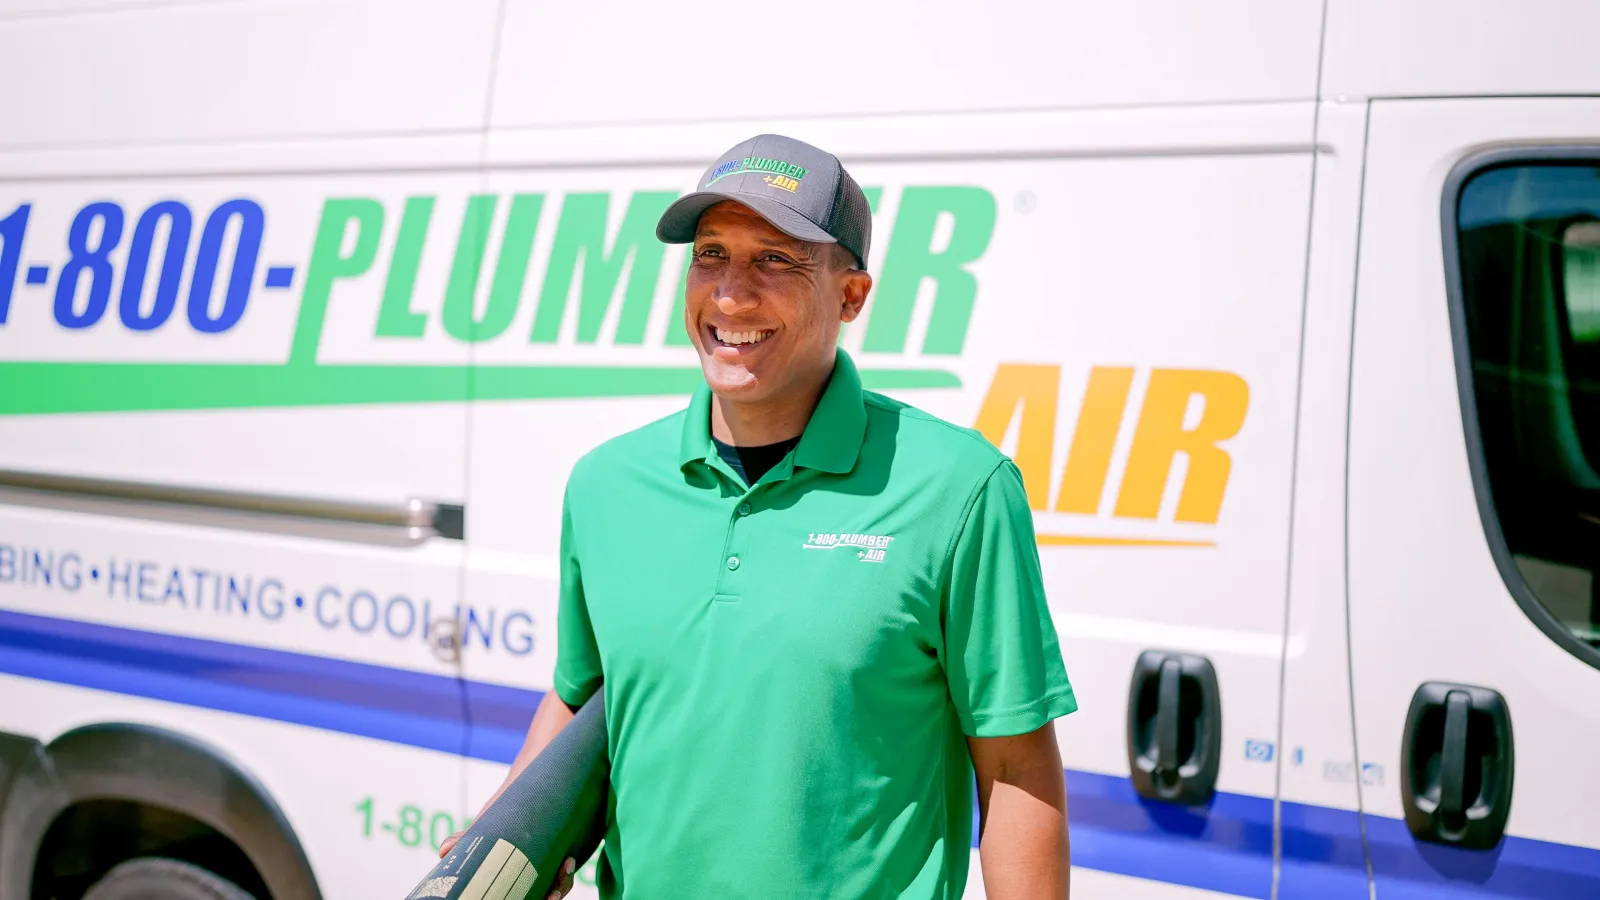 A 1-800-Plumber +Air of Northwest Houston water treatment technician